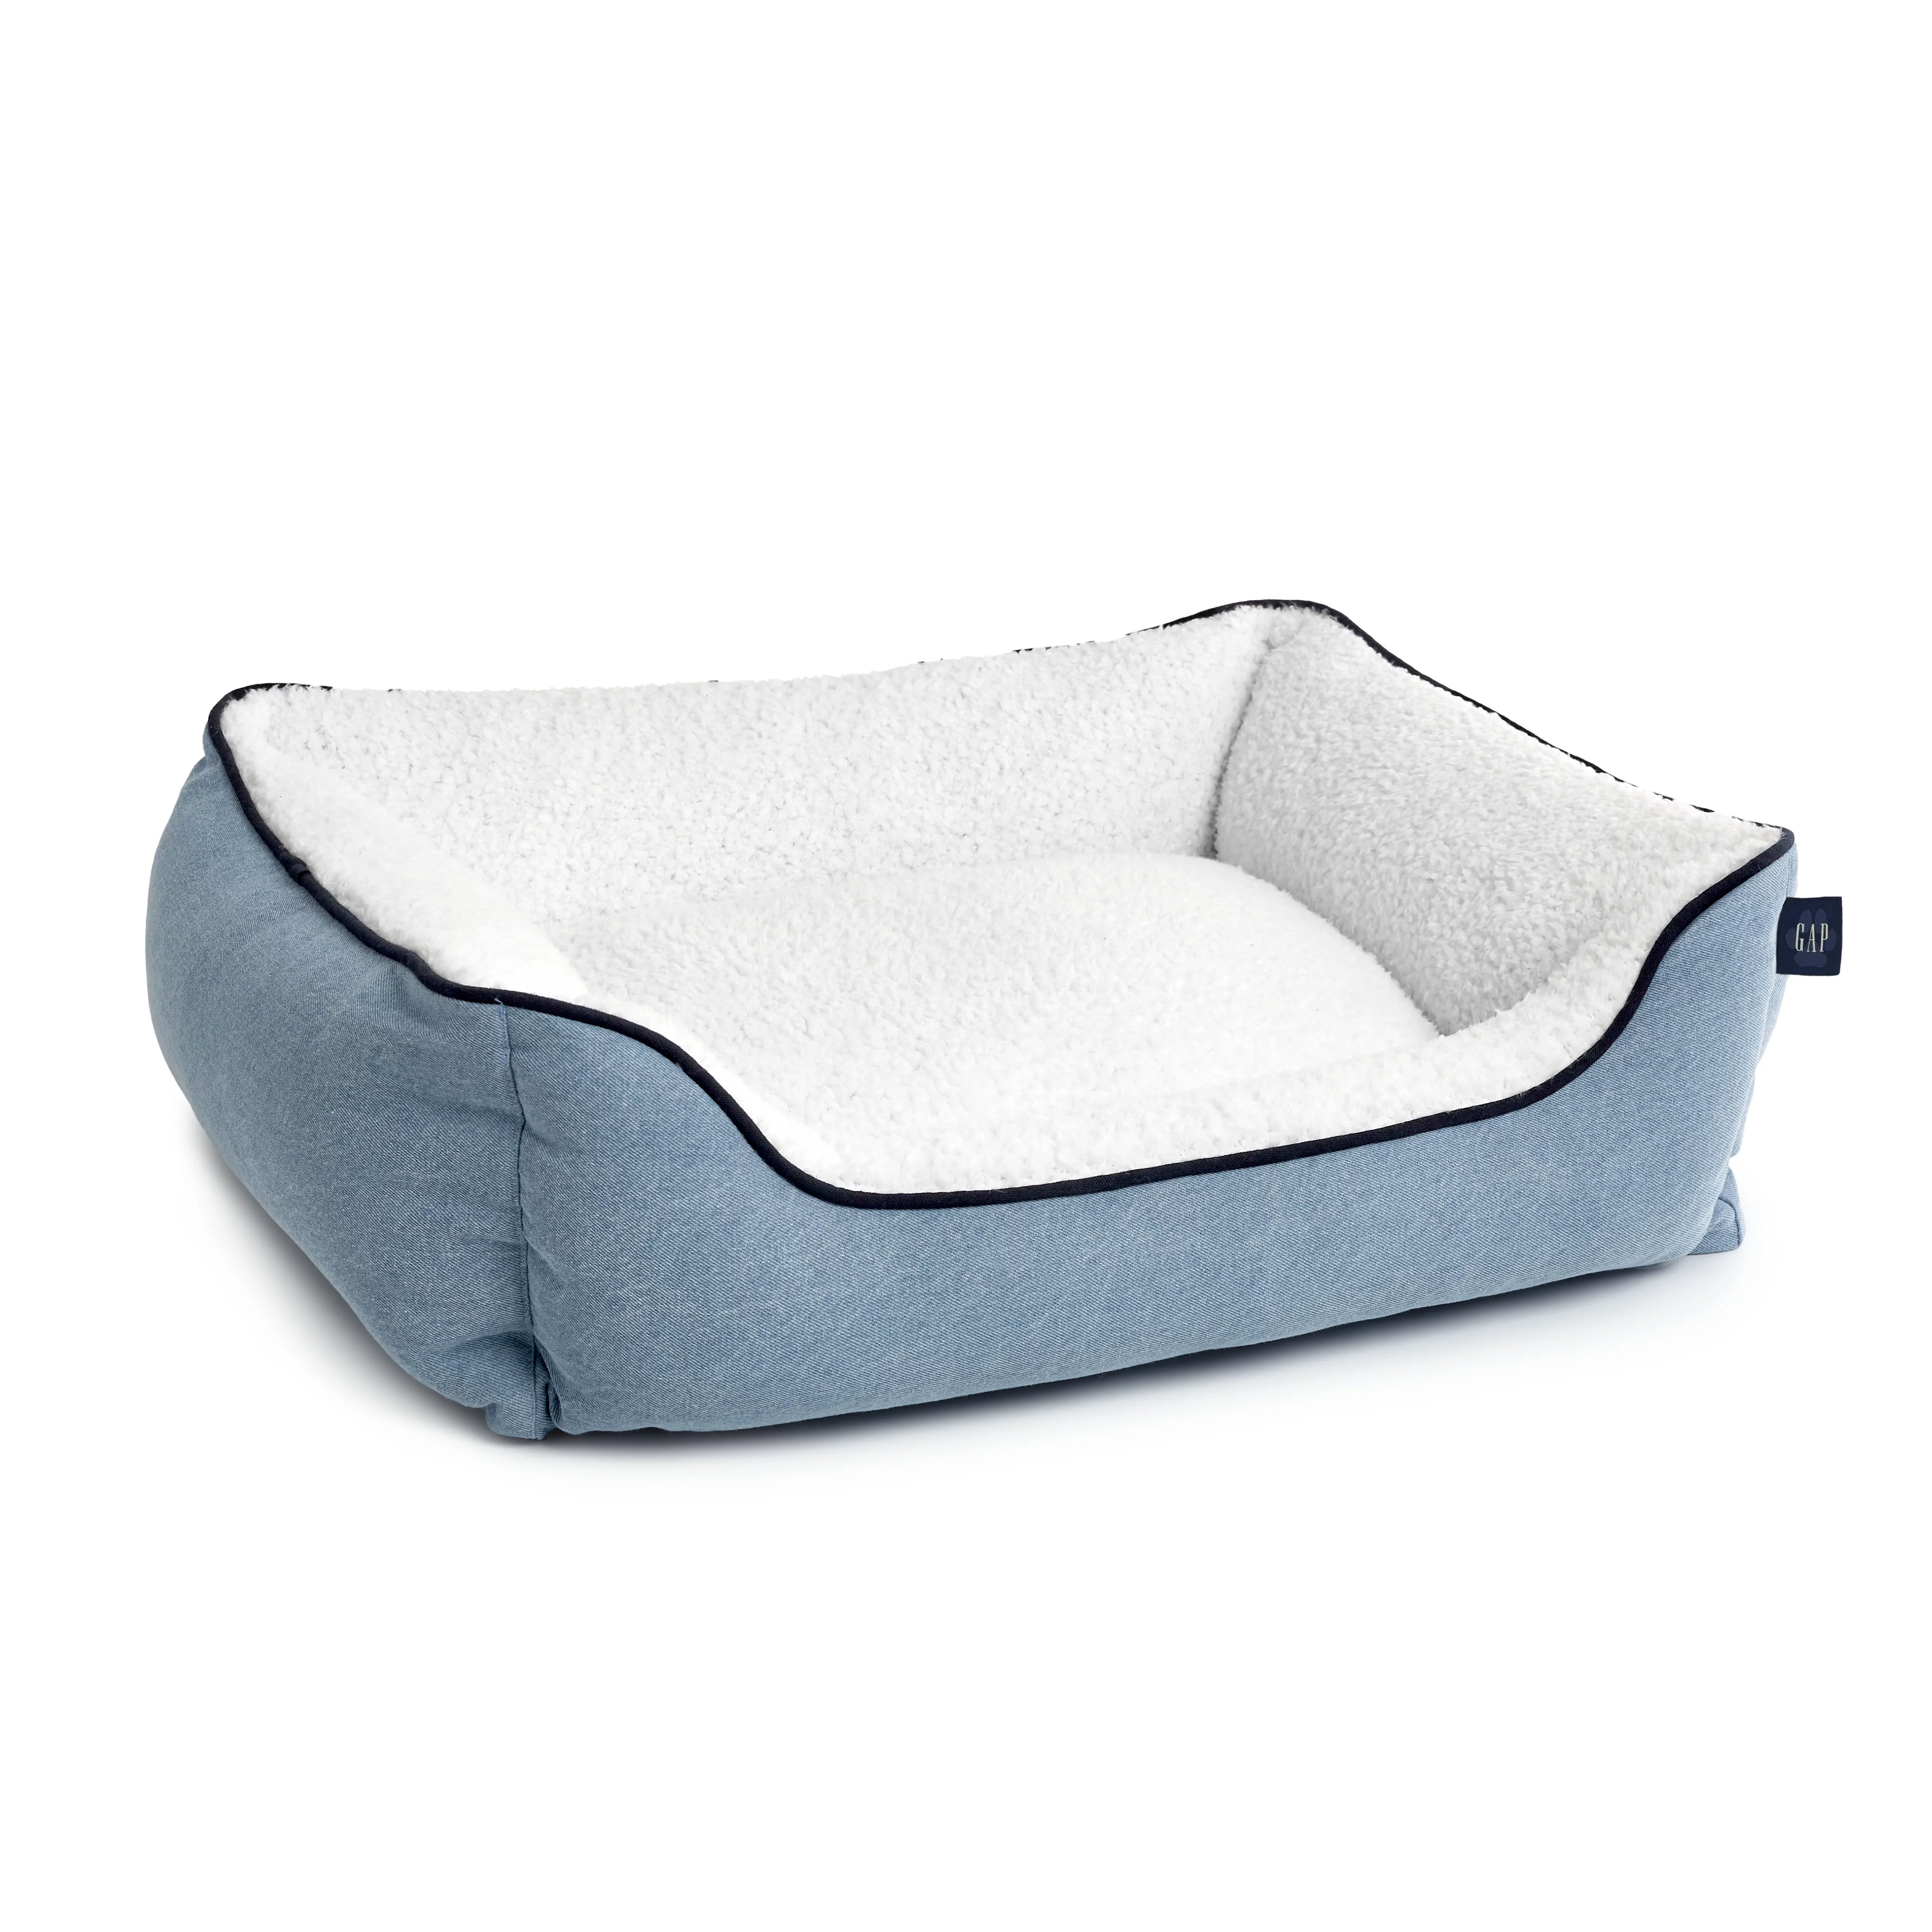 Gap Washed Denim Cuddler Pet Bed, Organic Cotton Cover with Polyester Sherpa inner, Small 20" x 18", Light Blue